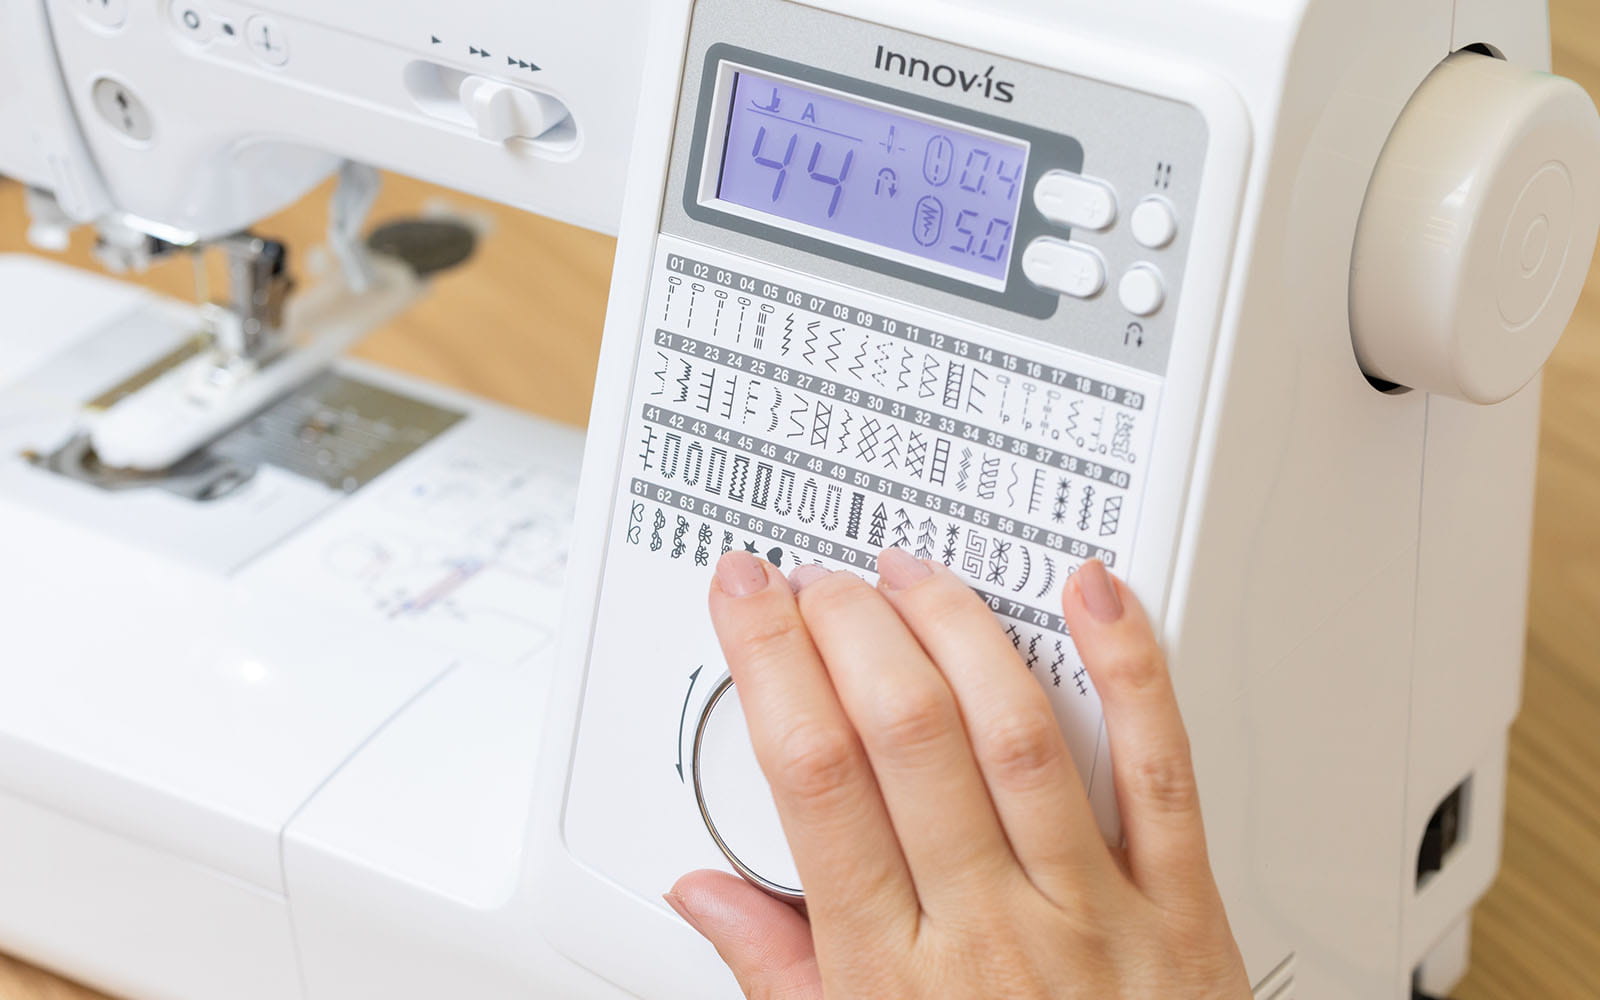 Hand choosing stitch via dial on white Brother sewing machine 